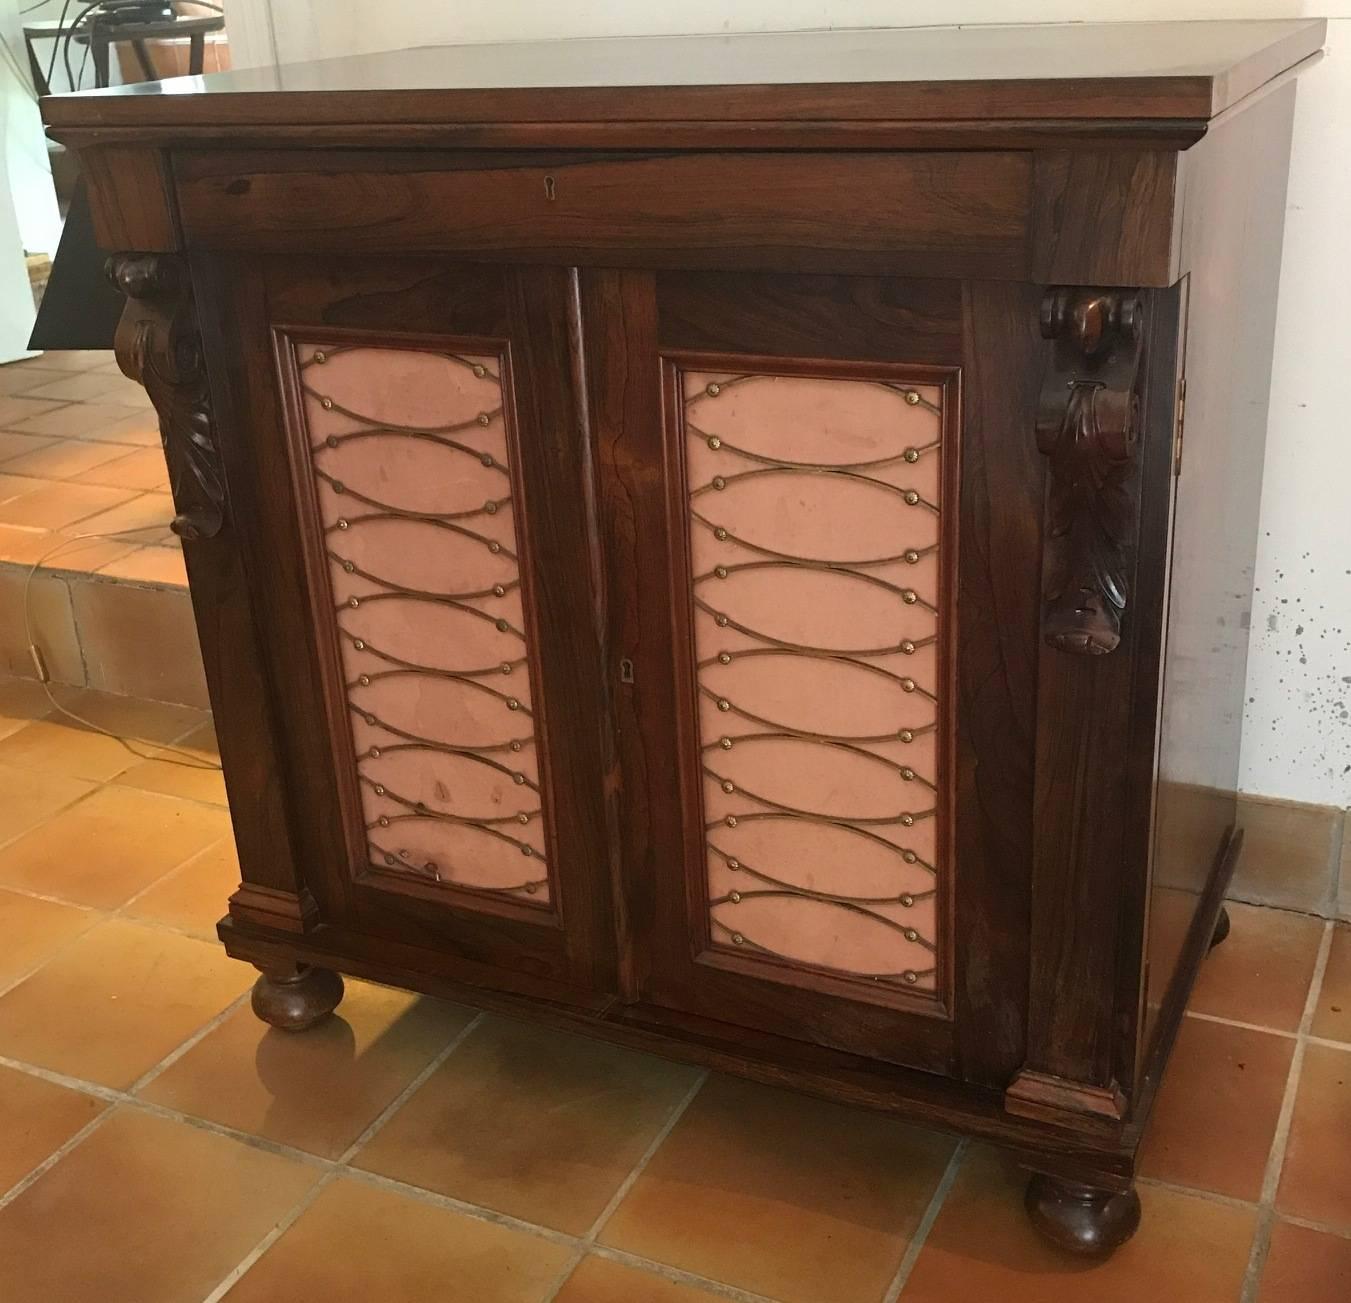 A beautiful rosewood two-door chiffonier with pink silk doors and brass fretwork. Two slide drawers inside. Lovely patination to the rosewood.